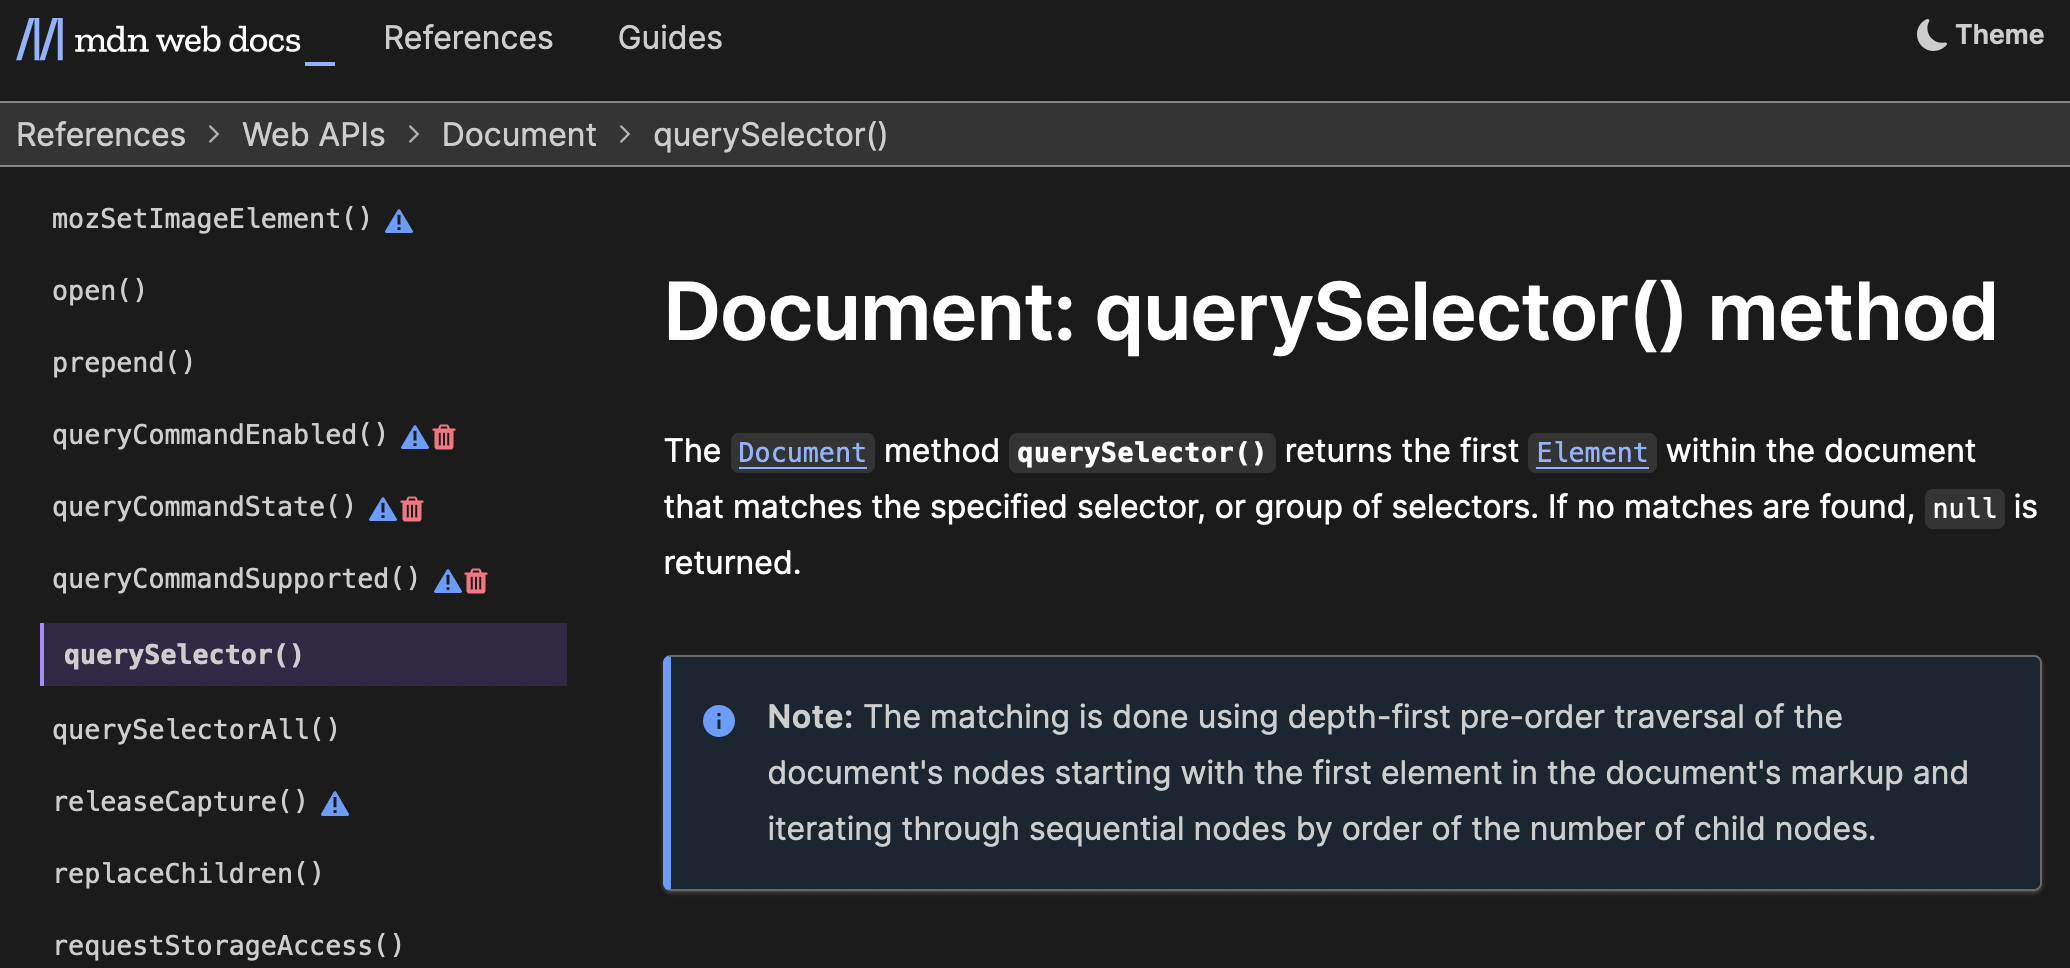 screenshot of new title for Document's querySelector() method, which reads 'Document: querySelector() method'